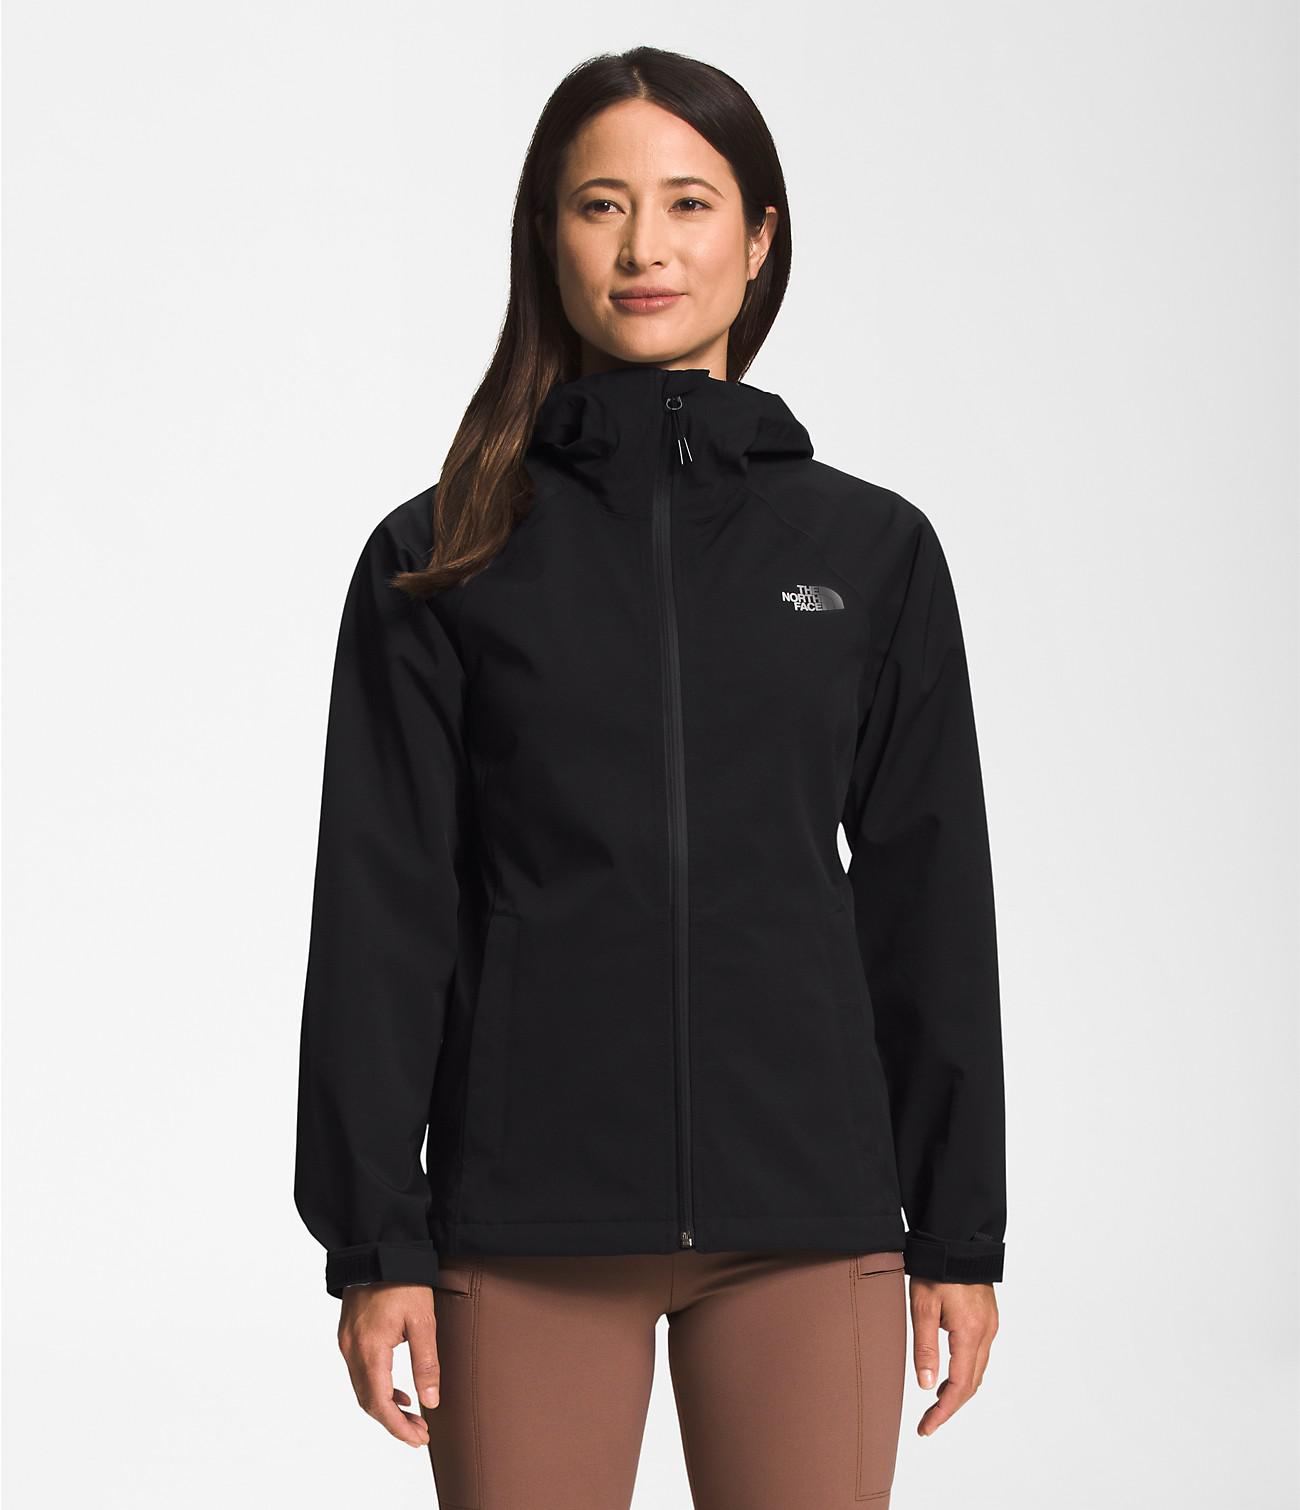 Women’s Valle Vista Jacket by THE NORTH FACE | jellibeans